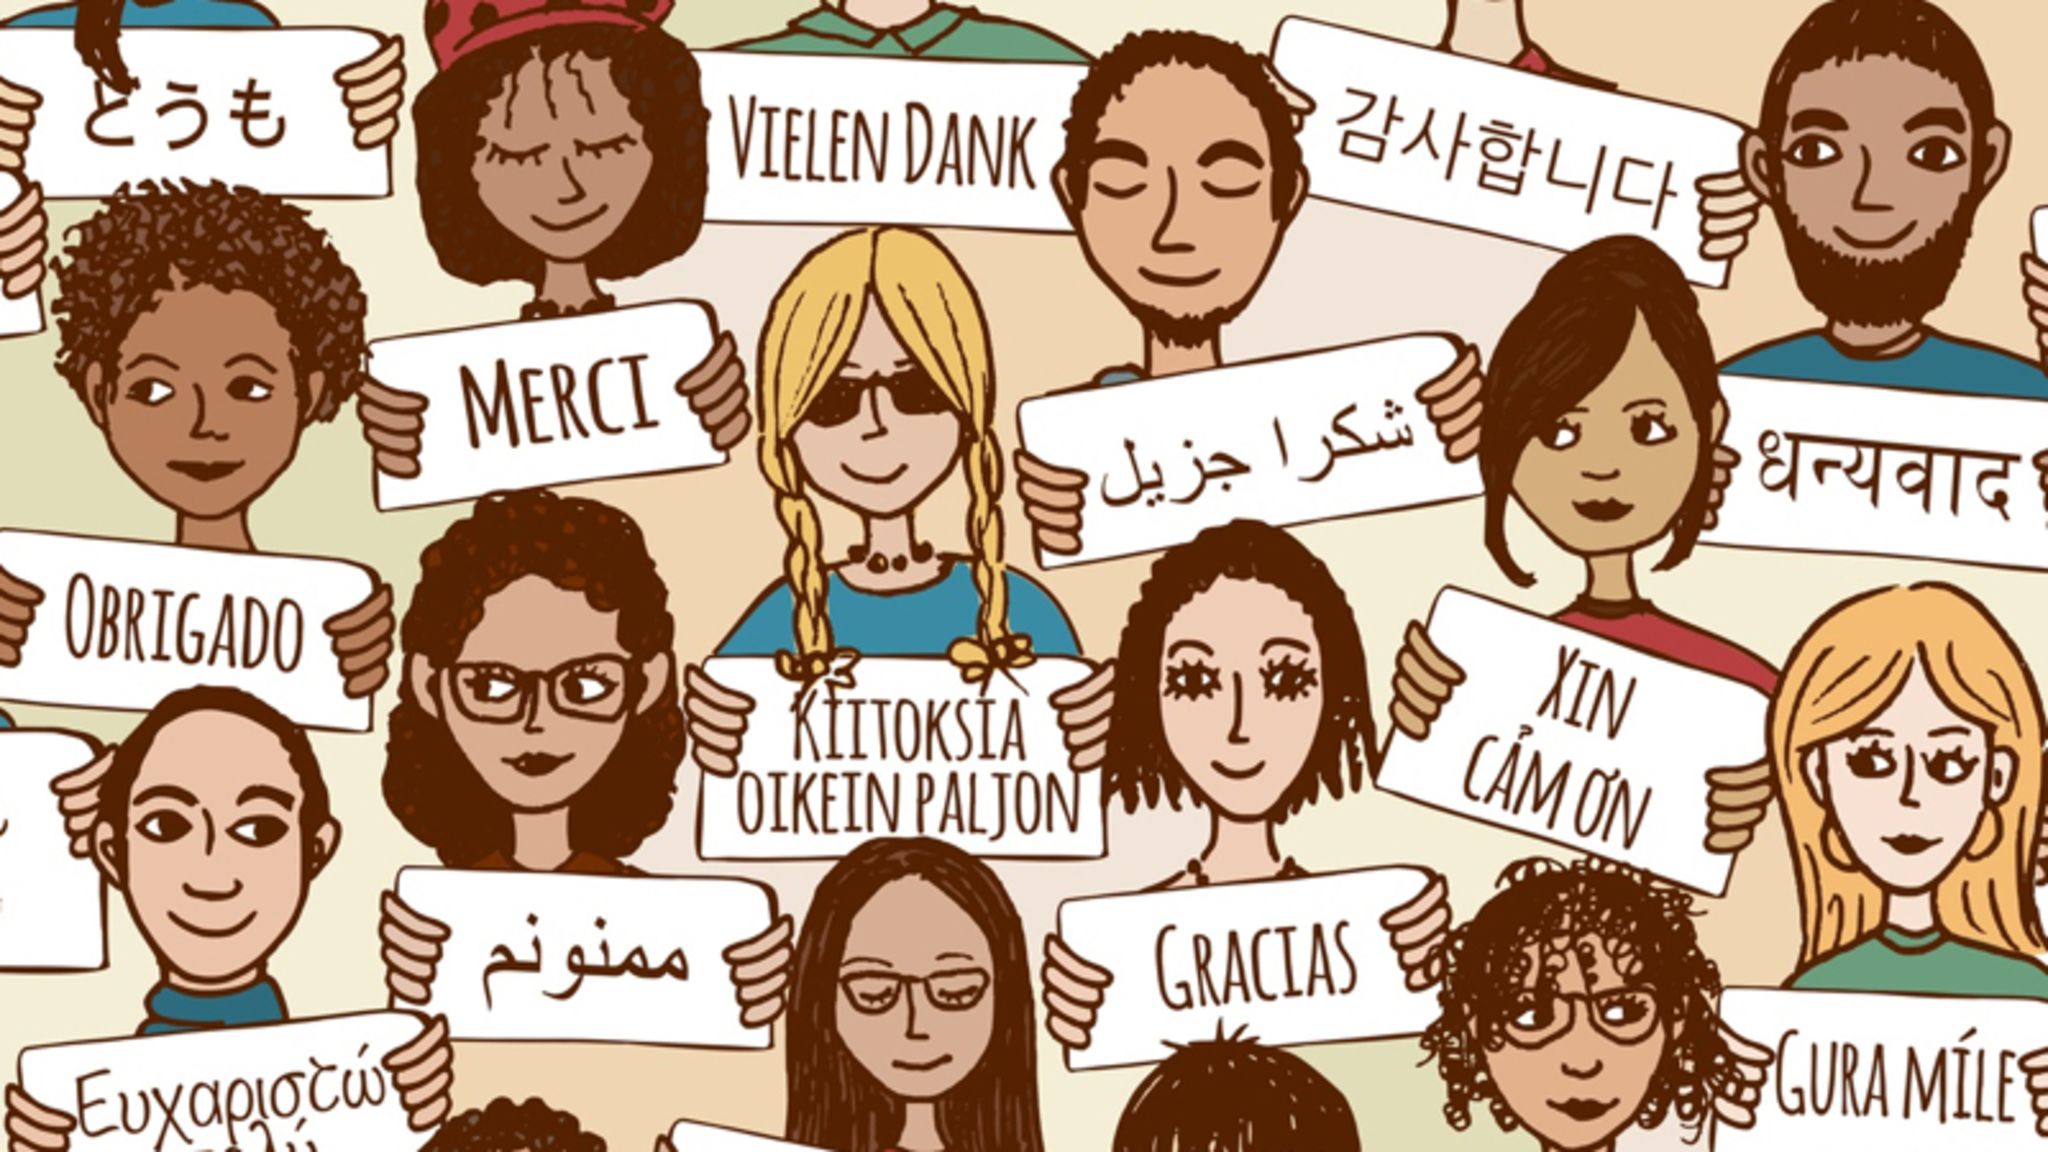 different cartoon faces holding signs in different languages